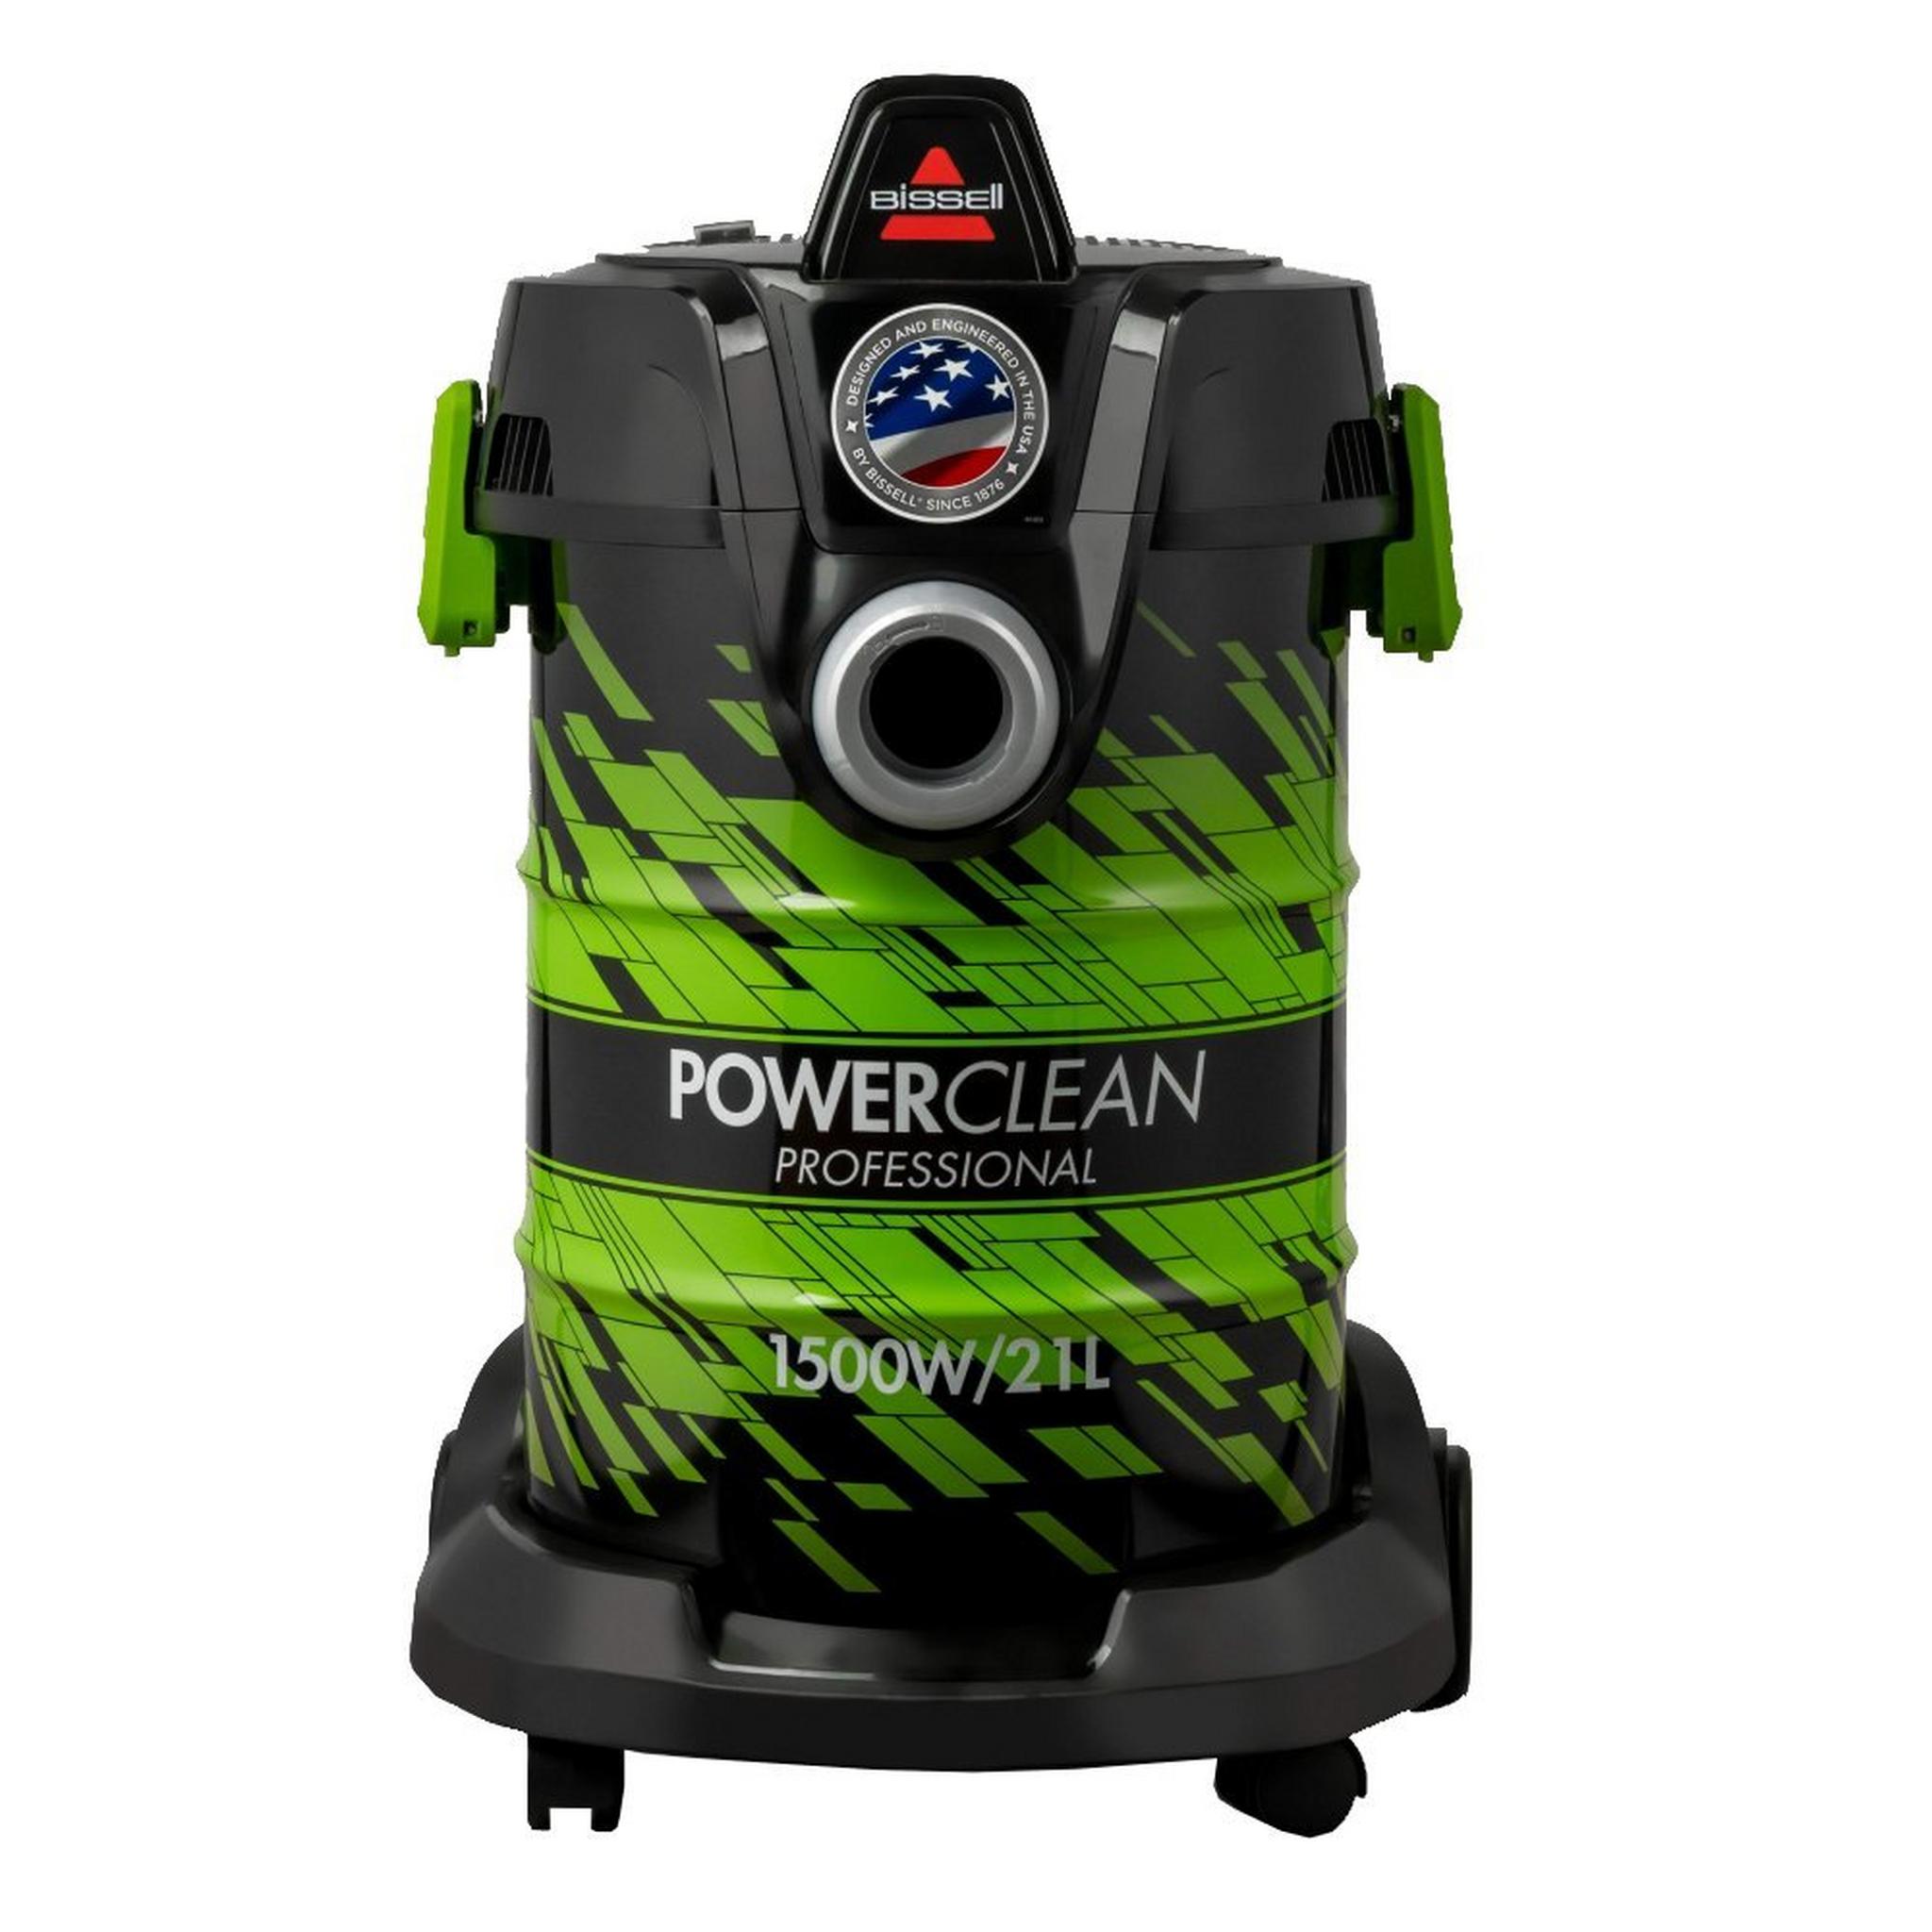 Bissell PowerClean Drum Wet & Dry Vacuum Cleaner, 1500W, 21 Litre,2026E - Black/Green